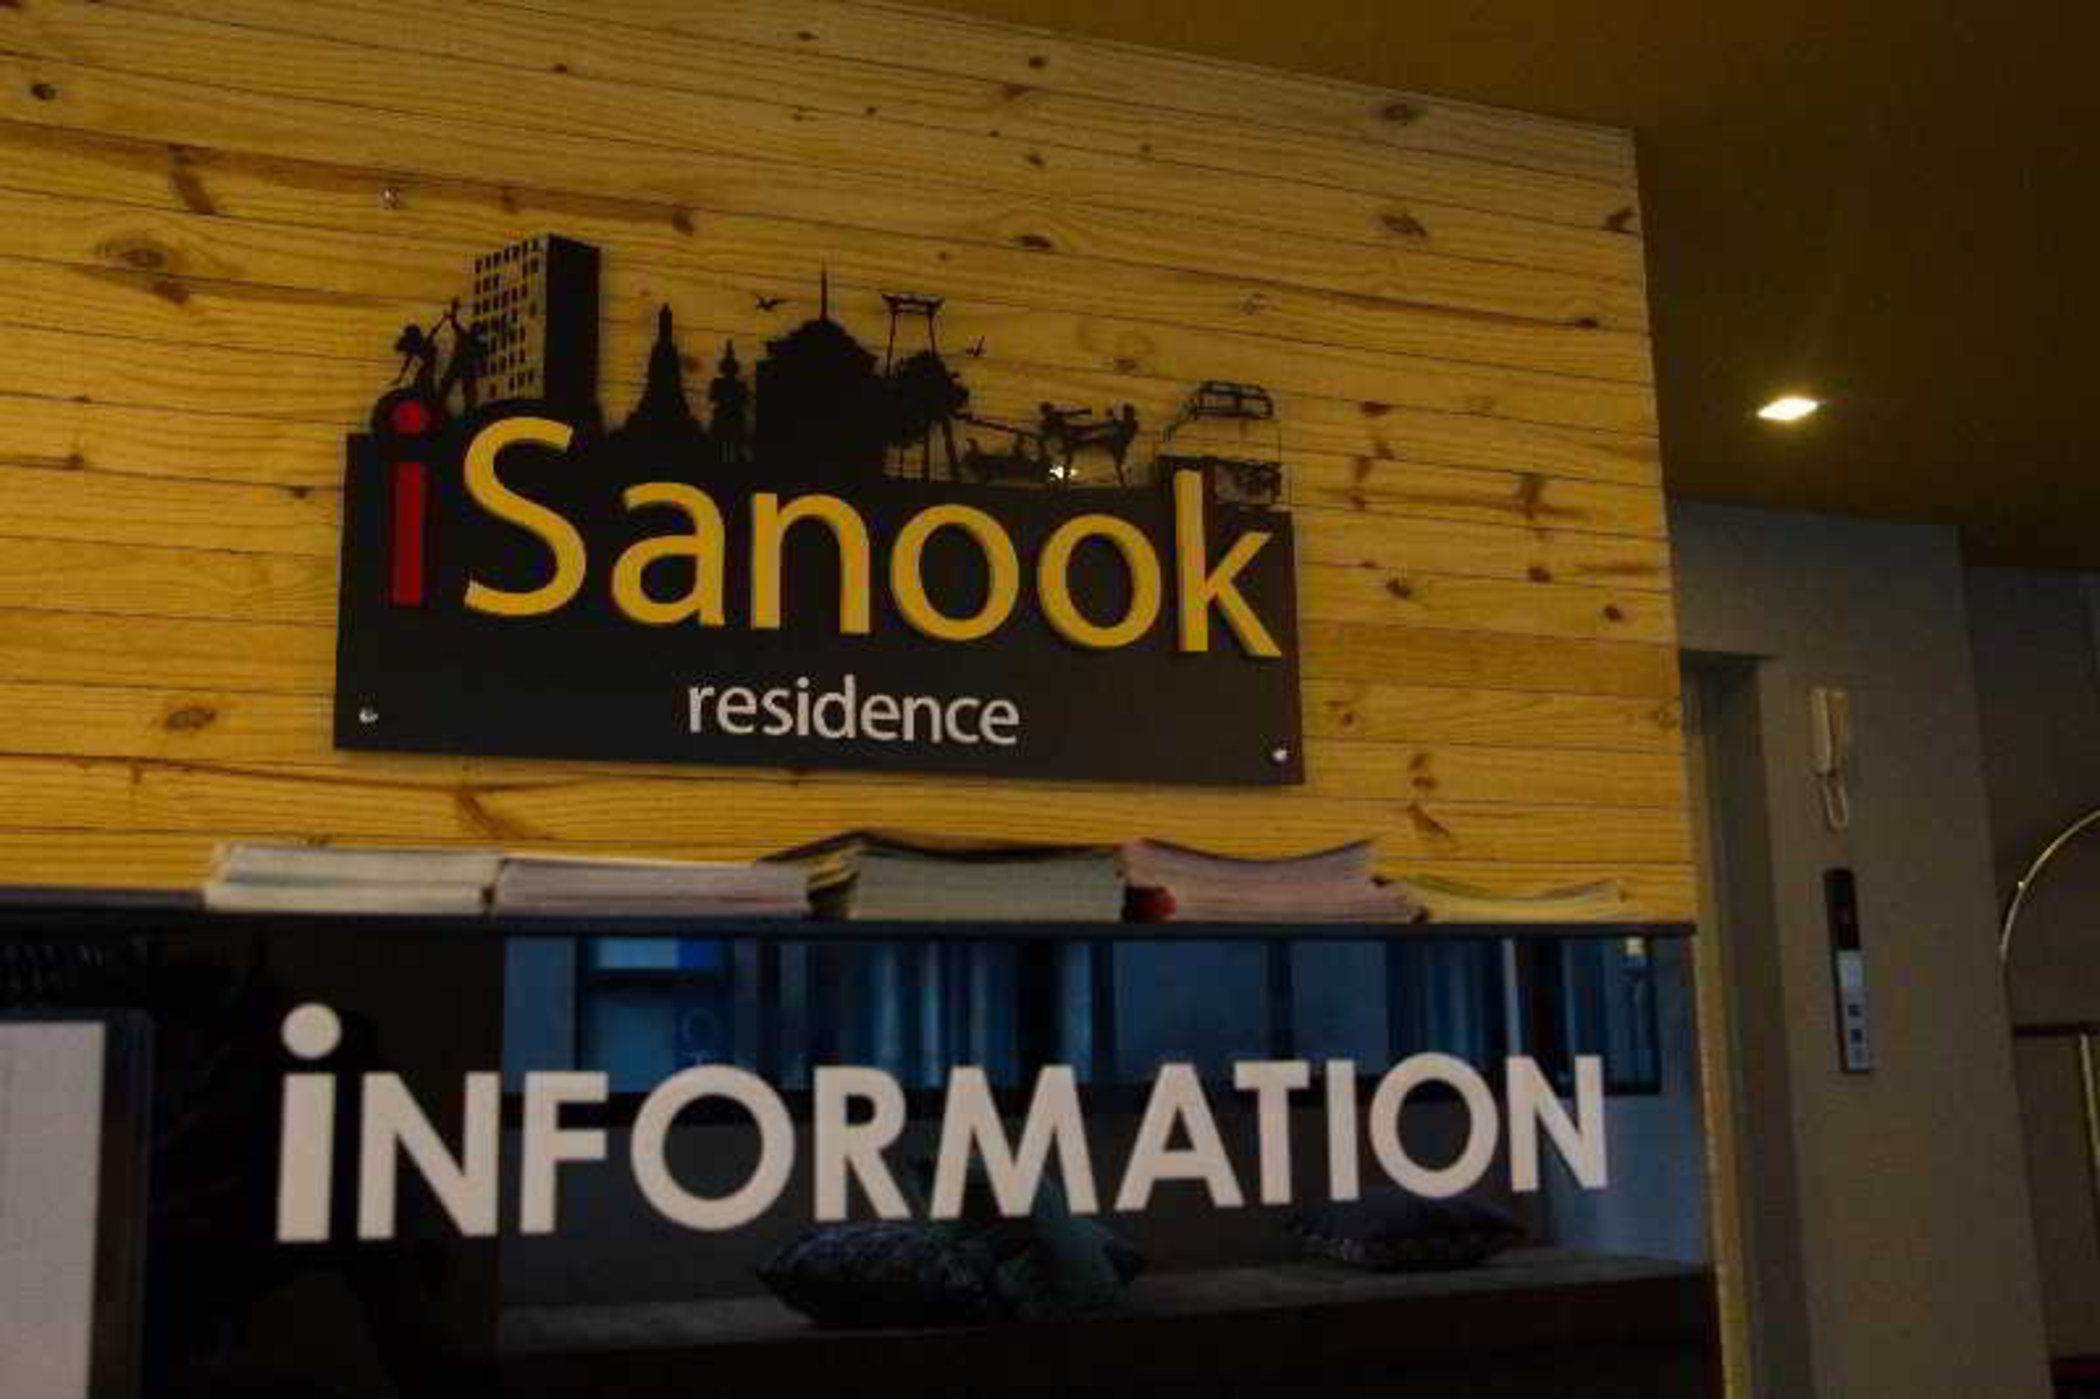 iSanook Residence